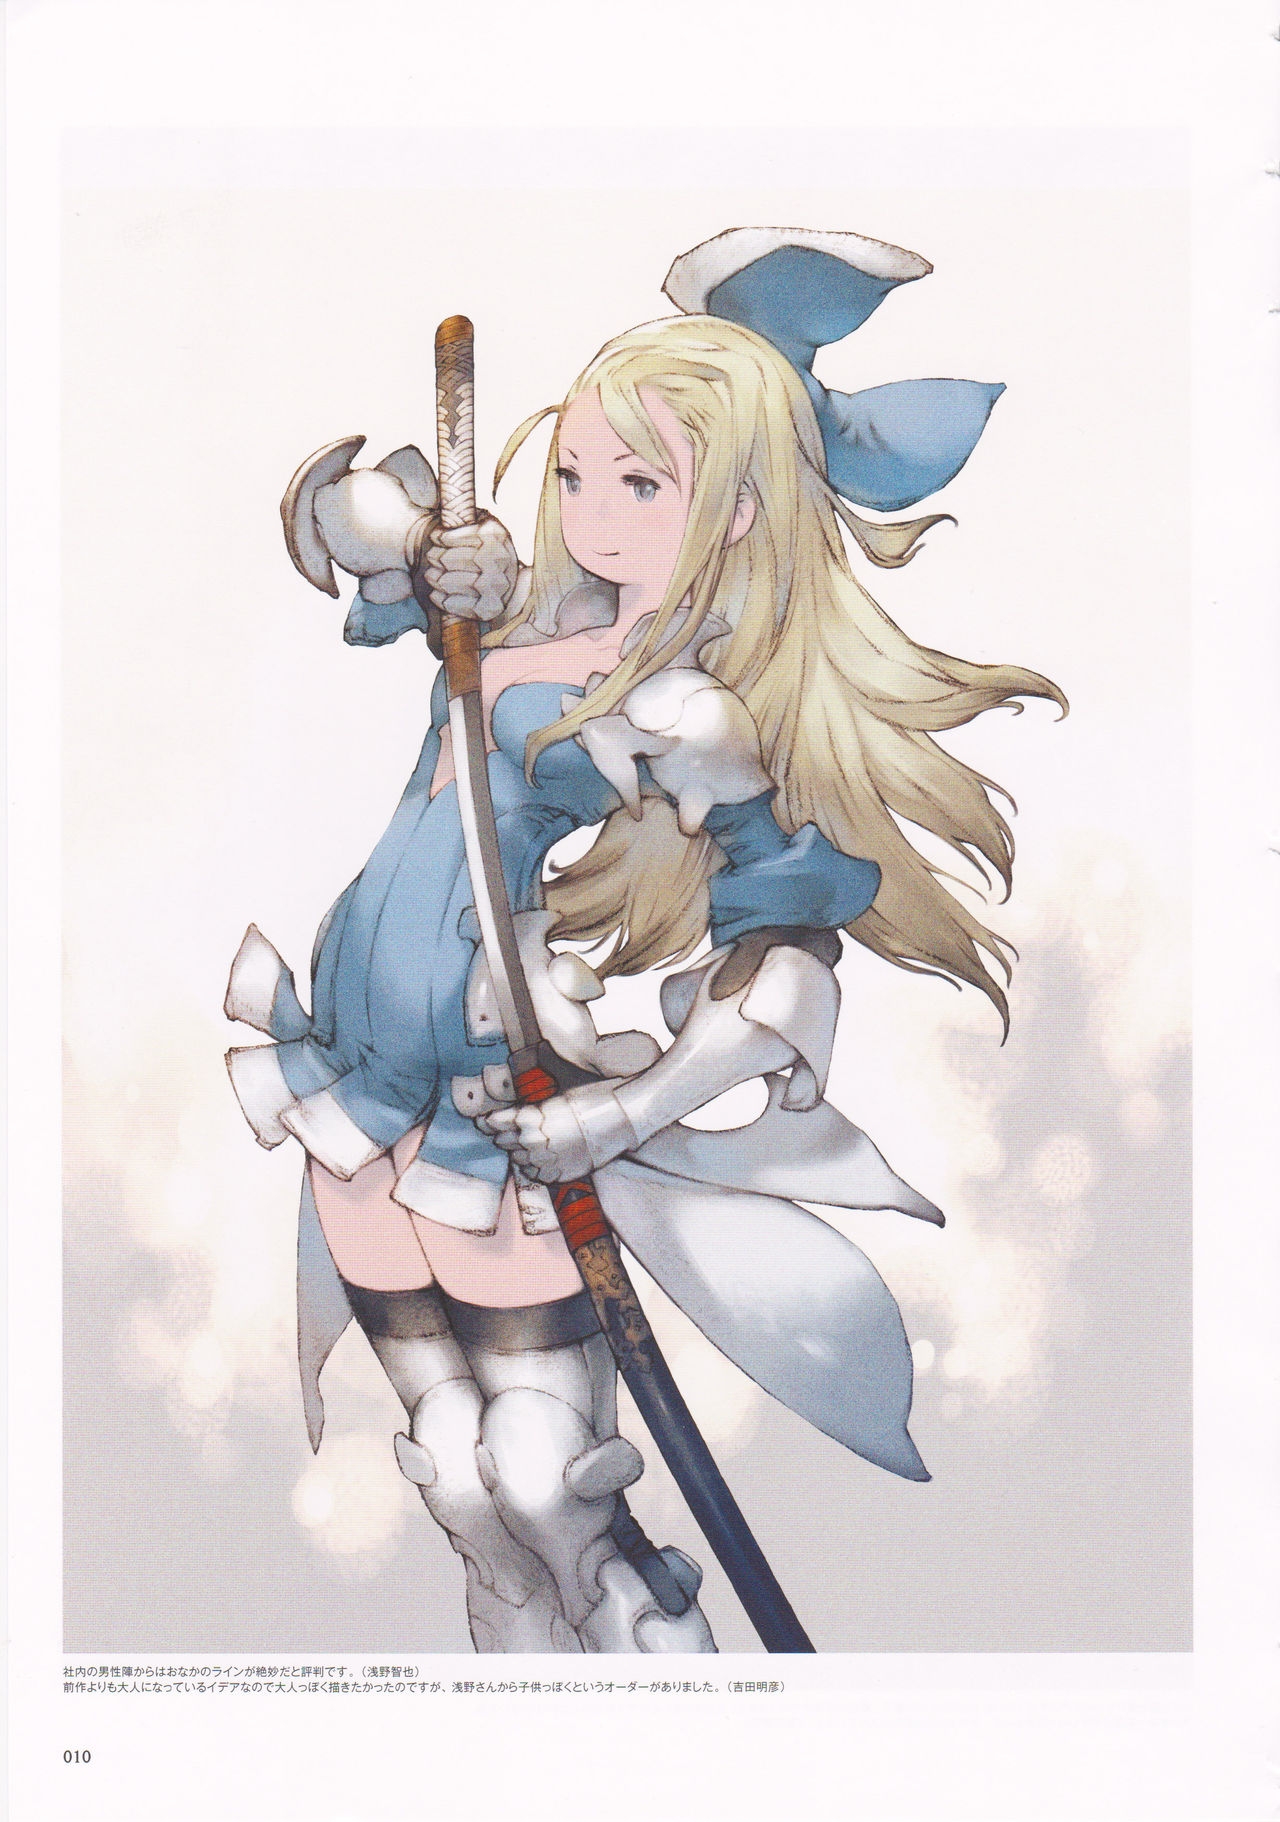 Bravely Second - End Layer - Design Works THE ART OF BRAVELY 2013-2015 10